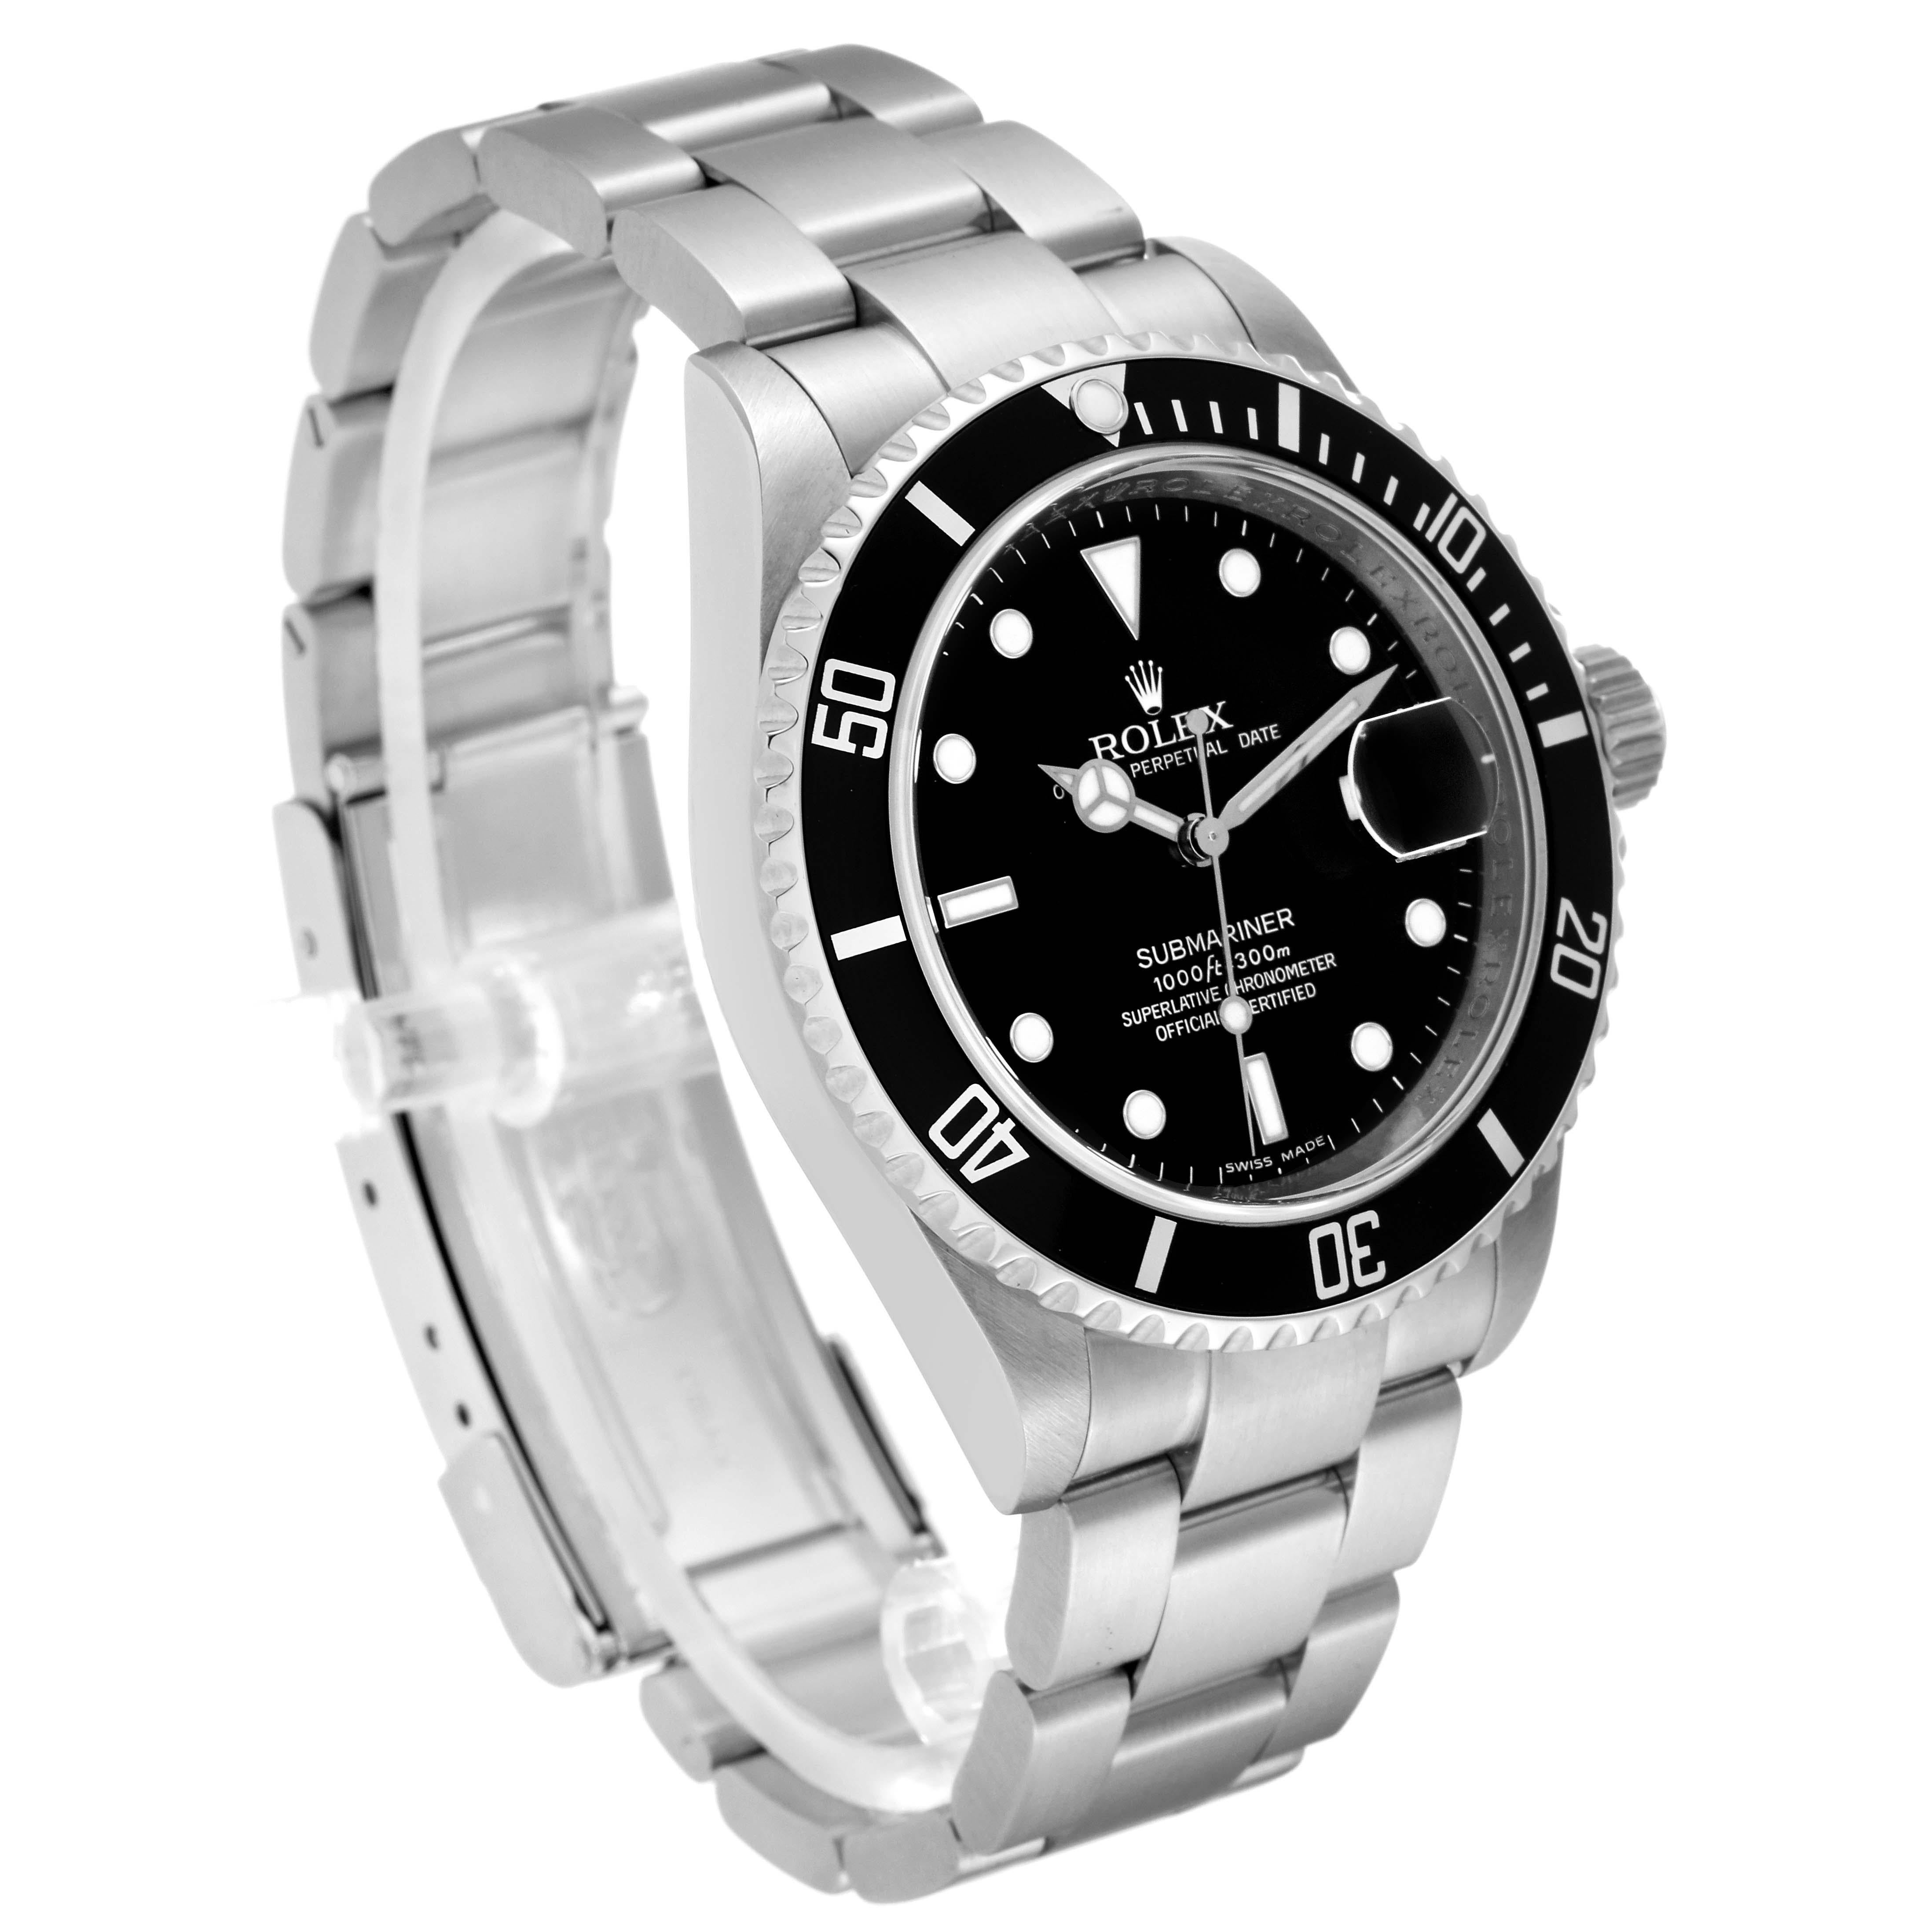 Rolex Submariner Date Black Dial Steel Mens Watch 16610 Box Card. Officially certified chronometer automatic self-winding movement. Stainless steel case 40.0 mm in diameter. Rolex logo on the crown. Special time-lapse unidirectional rotating bezel.